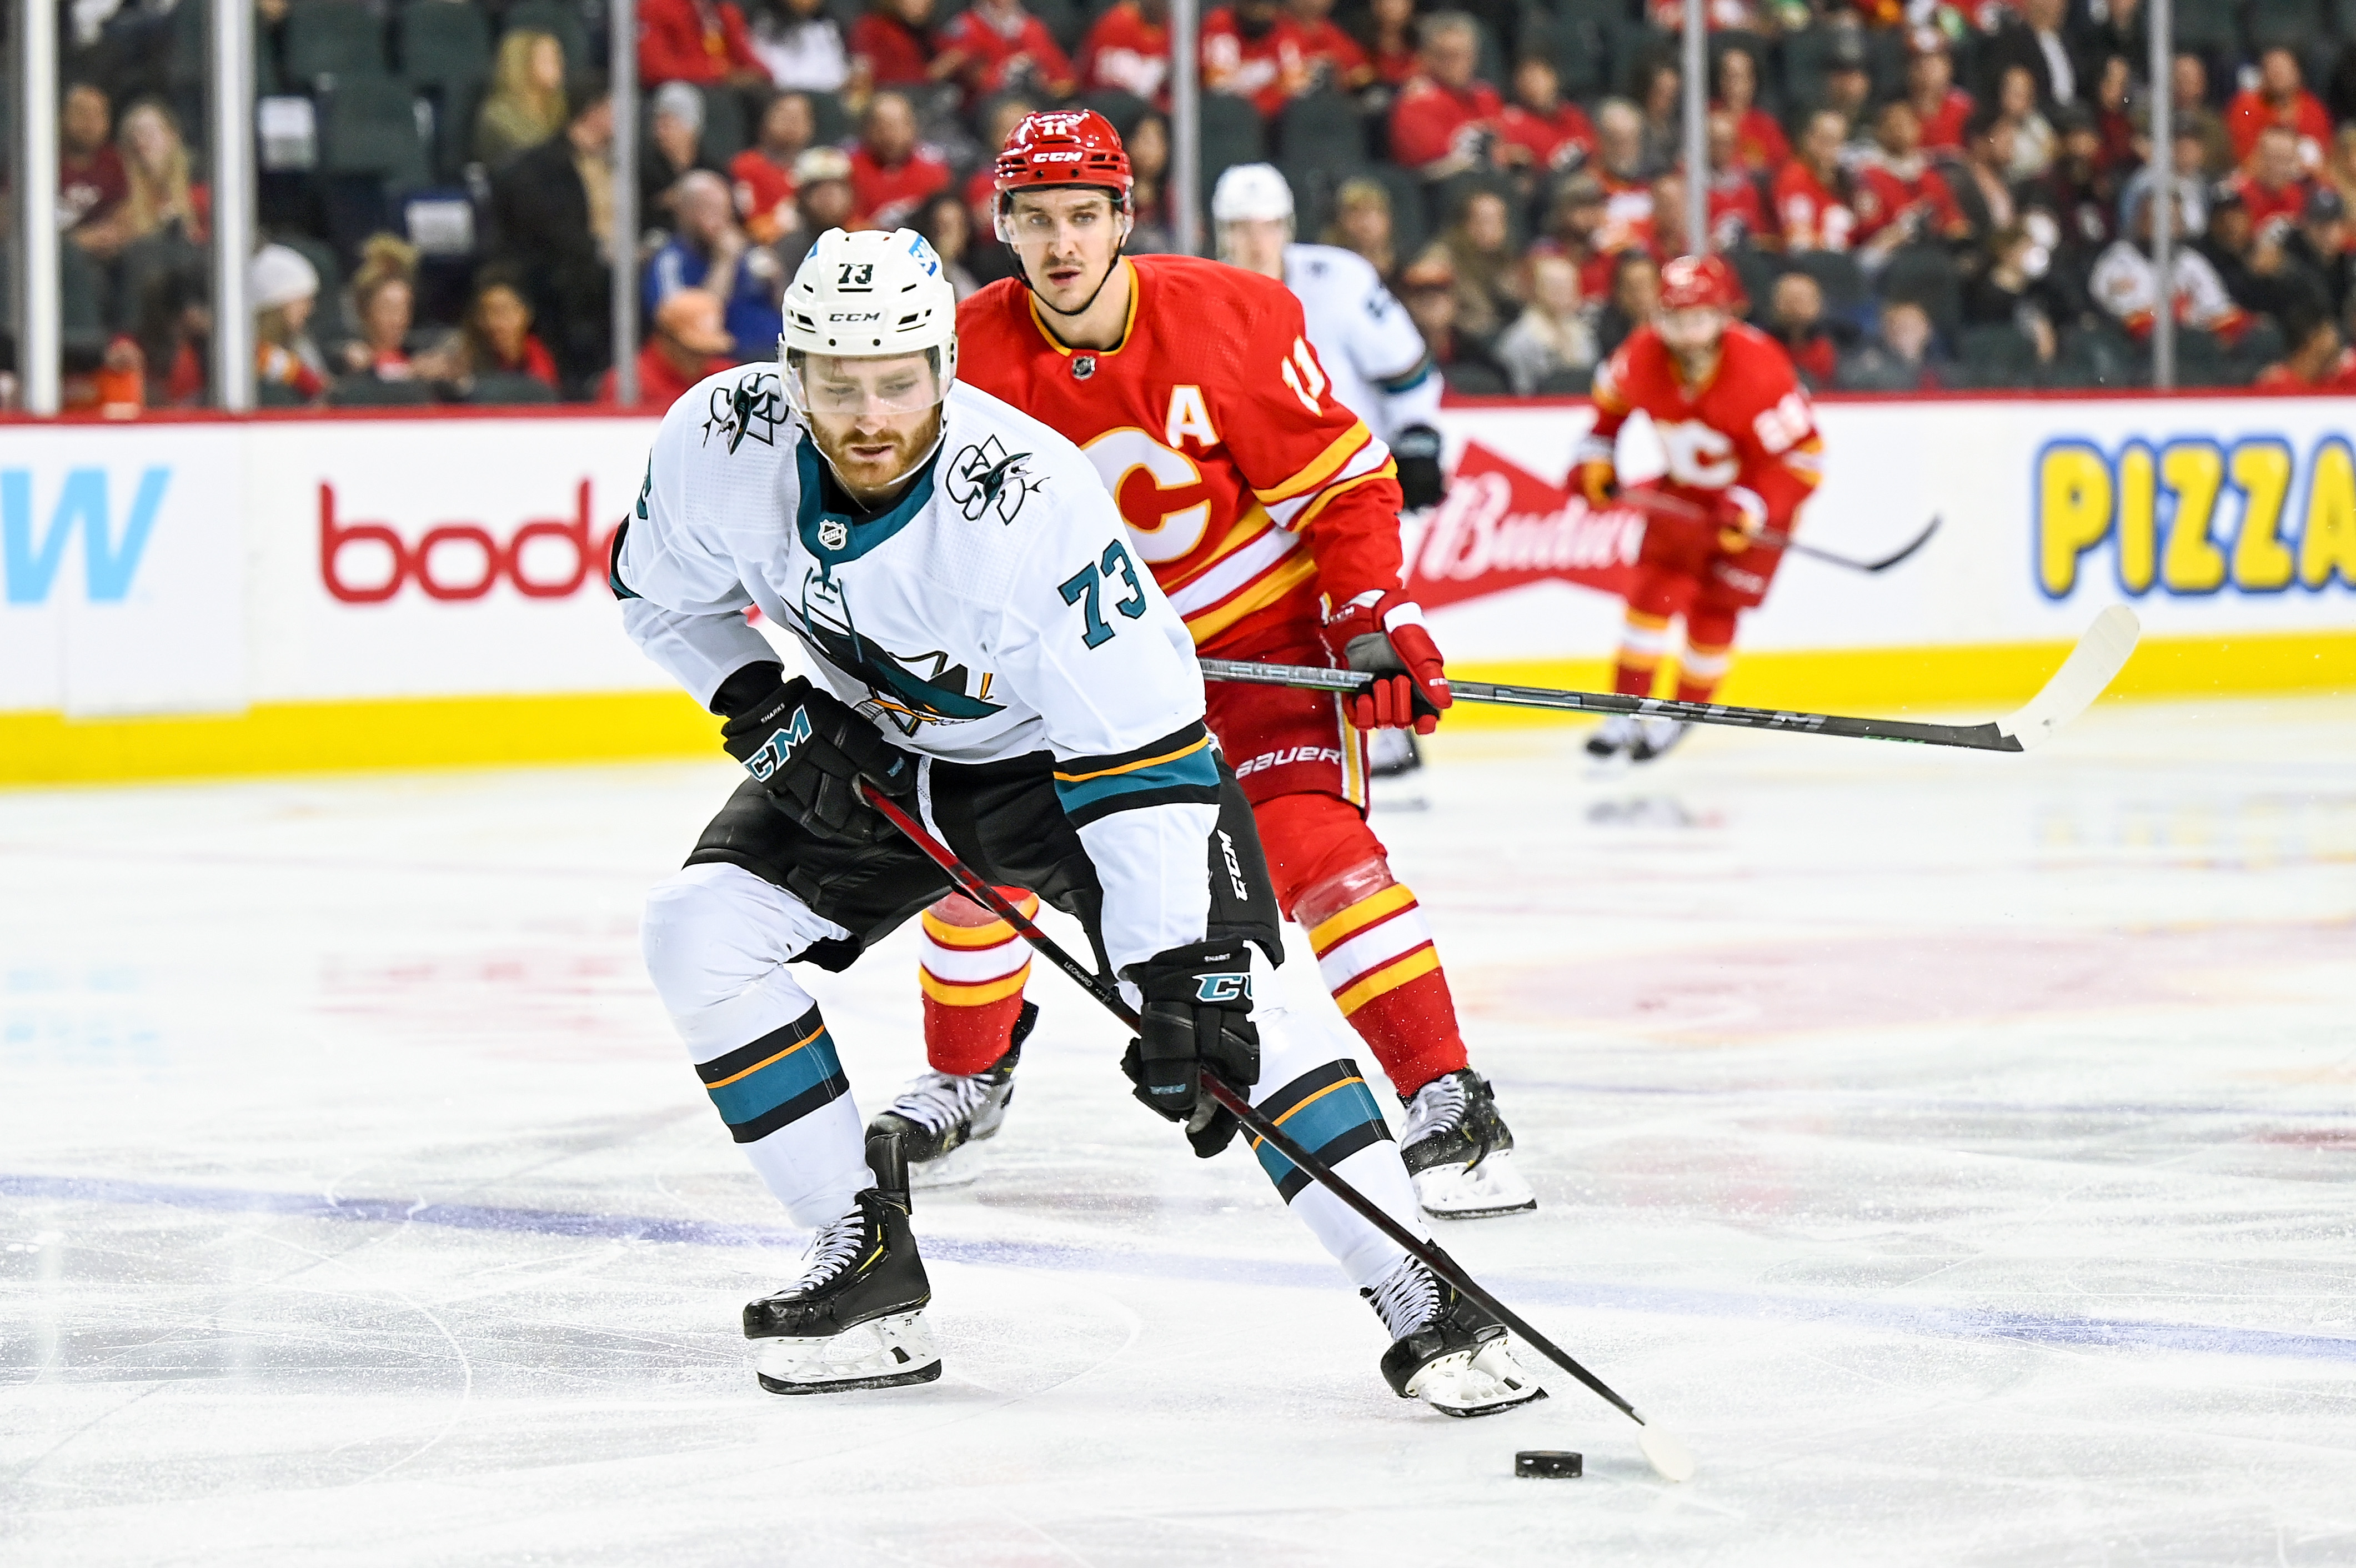 San Jose Sharks Winger Noah Gregor (73) skates with the puck while Calgary Flames Center Mikael Backlund (11) backchecks during the third period of an NHL game where the Calgary Flames hosted the San Jose Sharks on March 22, 2022, at the Scotiabank Saddledome in Calgary, AB.